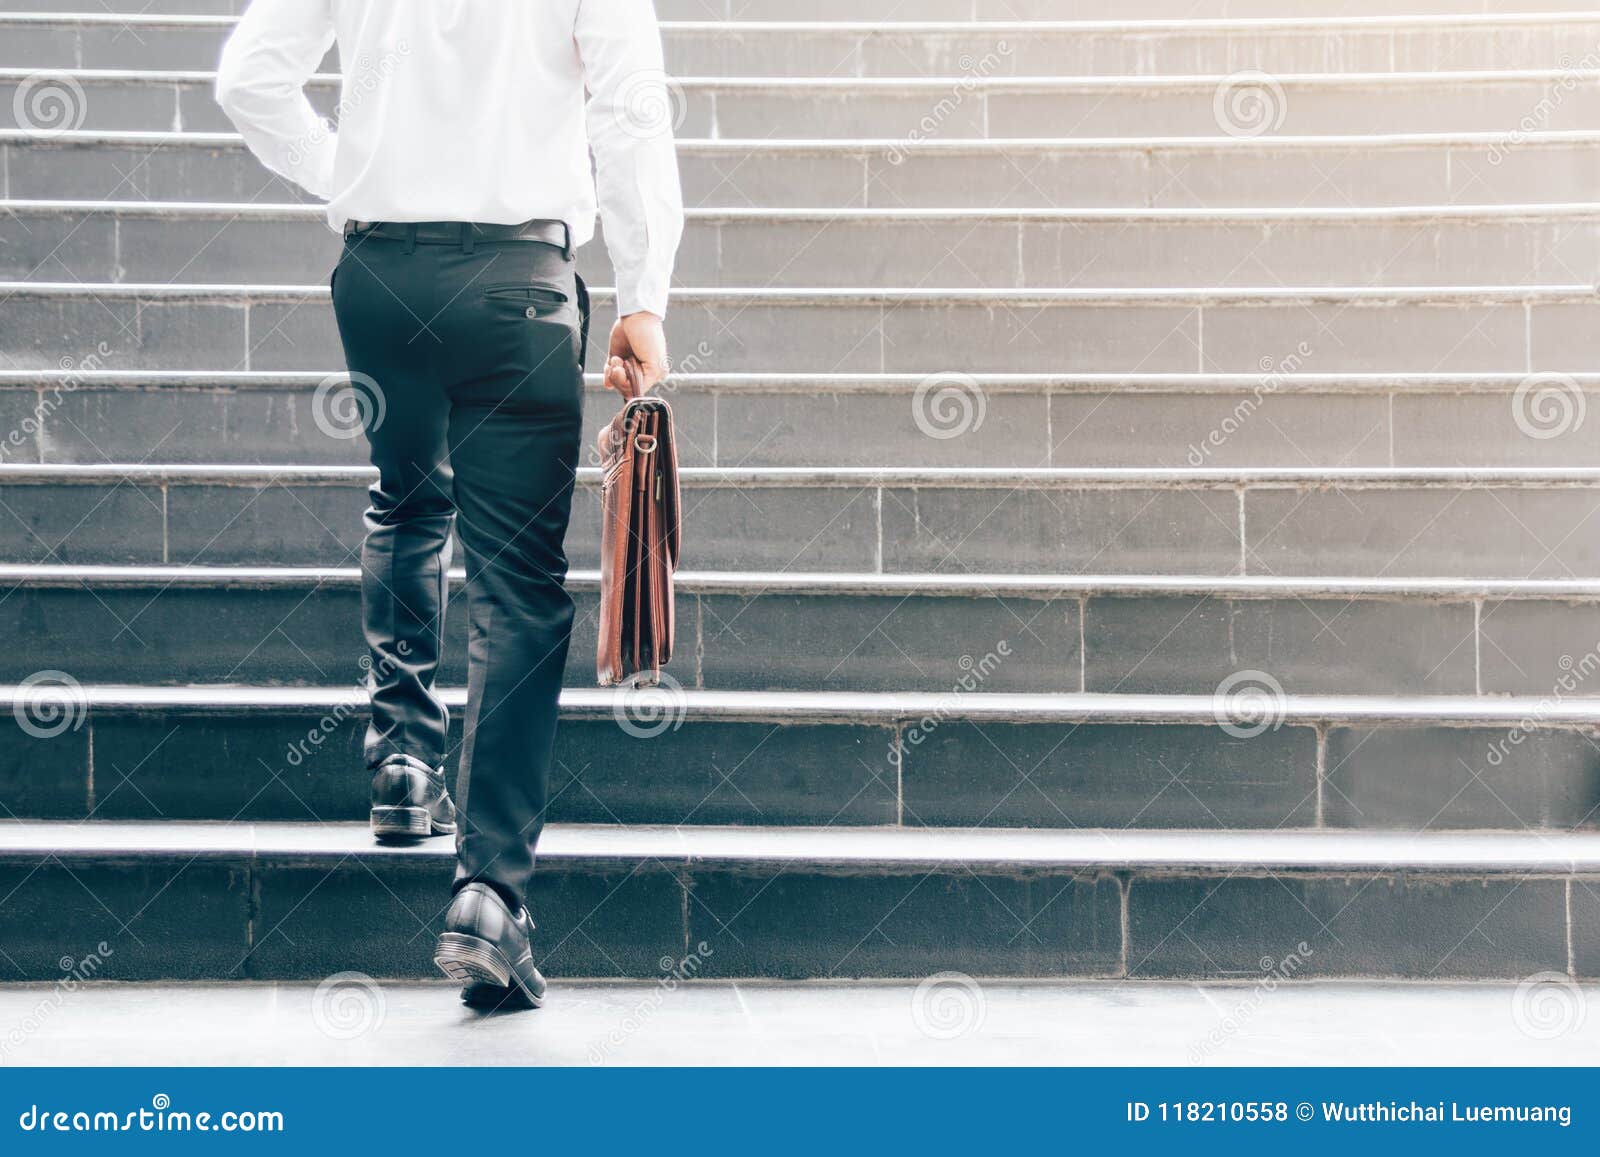 businessman walking up on stairs and holding briefcase.